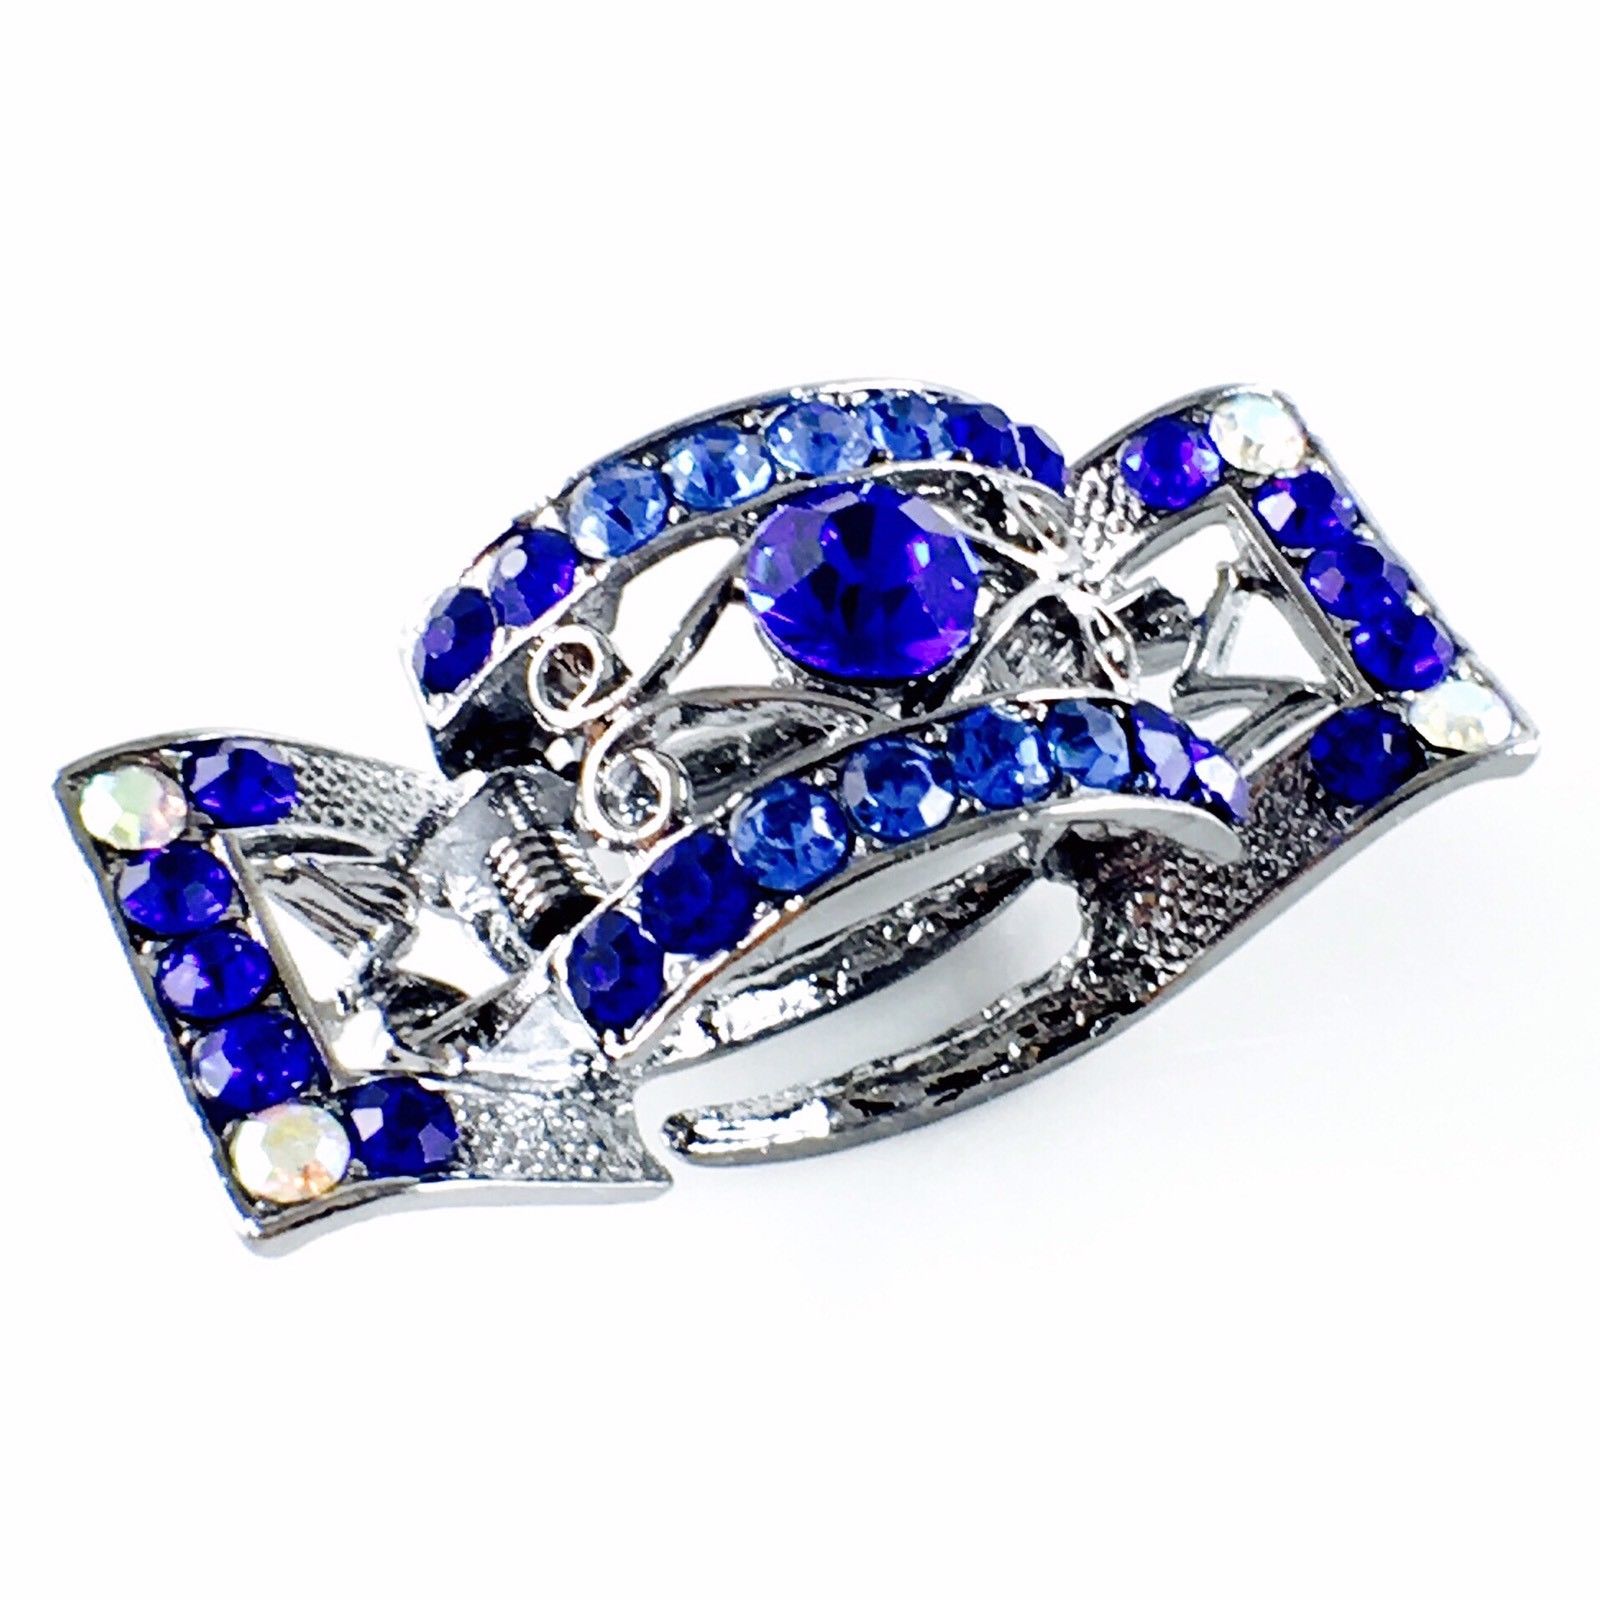 Castle Square Hair Claw Jaw Clip vintage use Rhinestone Crystal silver base Blue, Hair Claw - MOGHANT